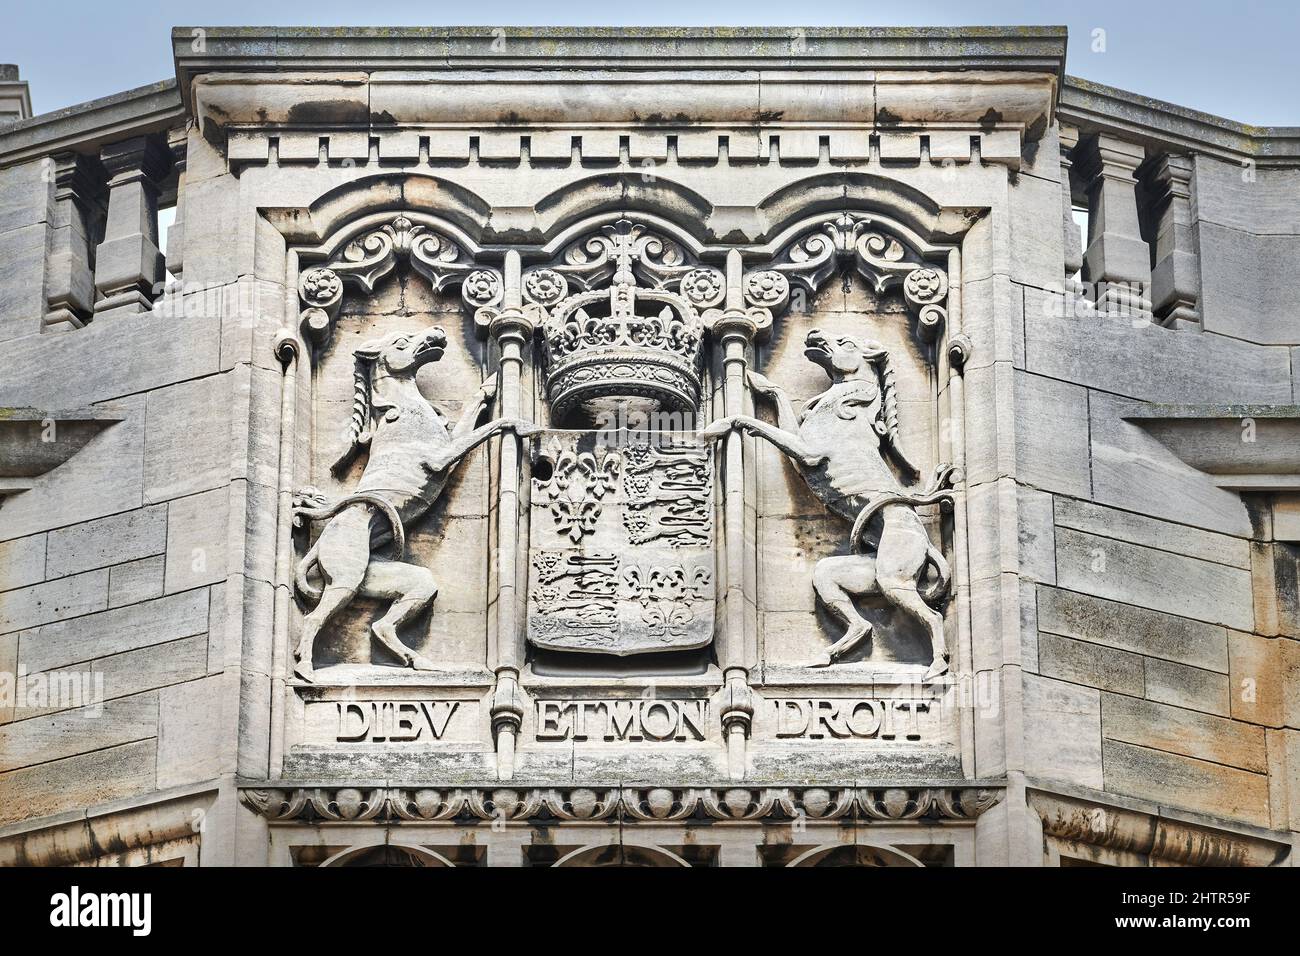 Stone sculpted royal coat of arms on an outside wall of King's college, university of Cambridge, England. Stock Photo